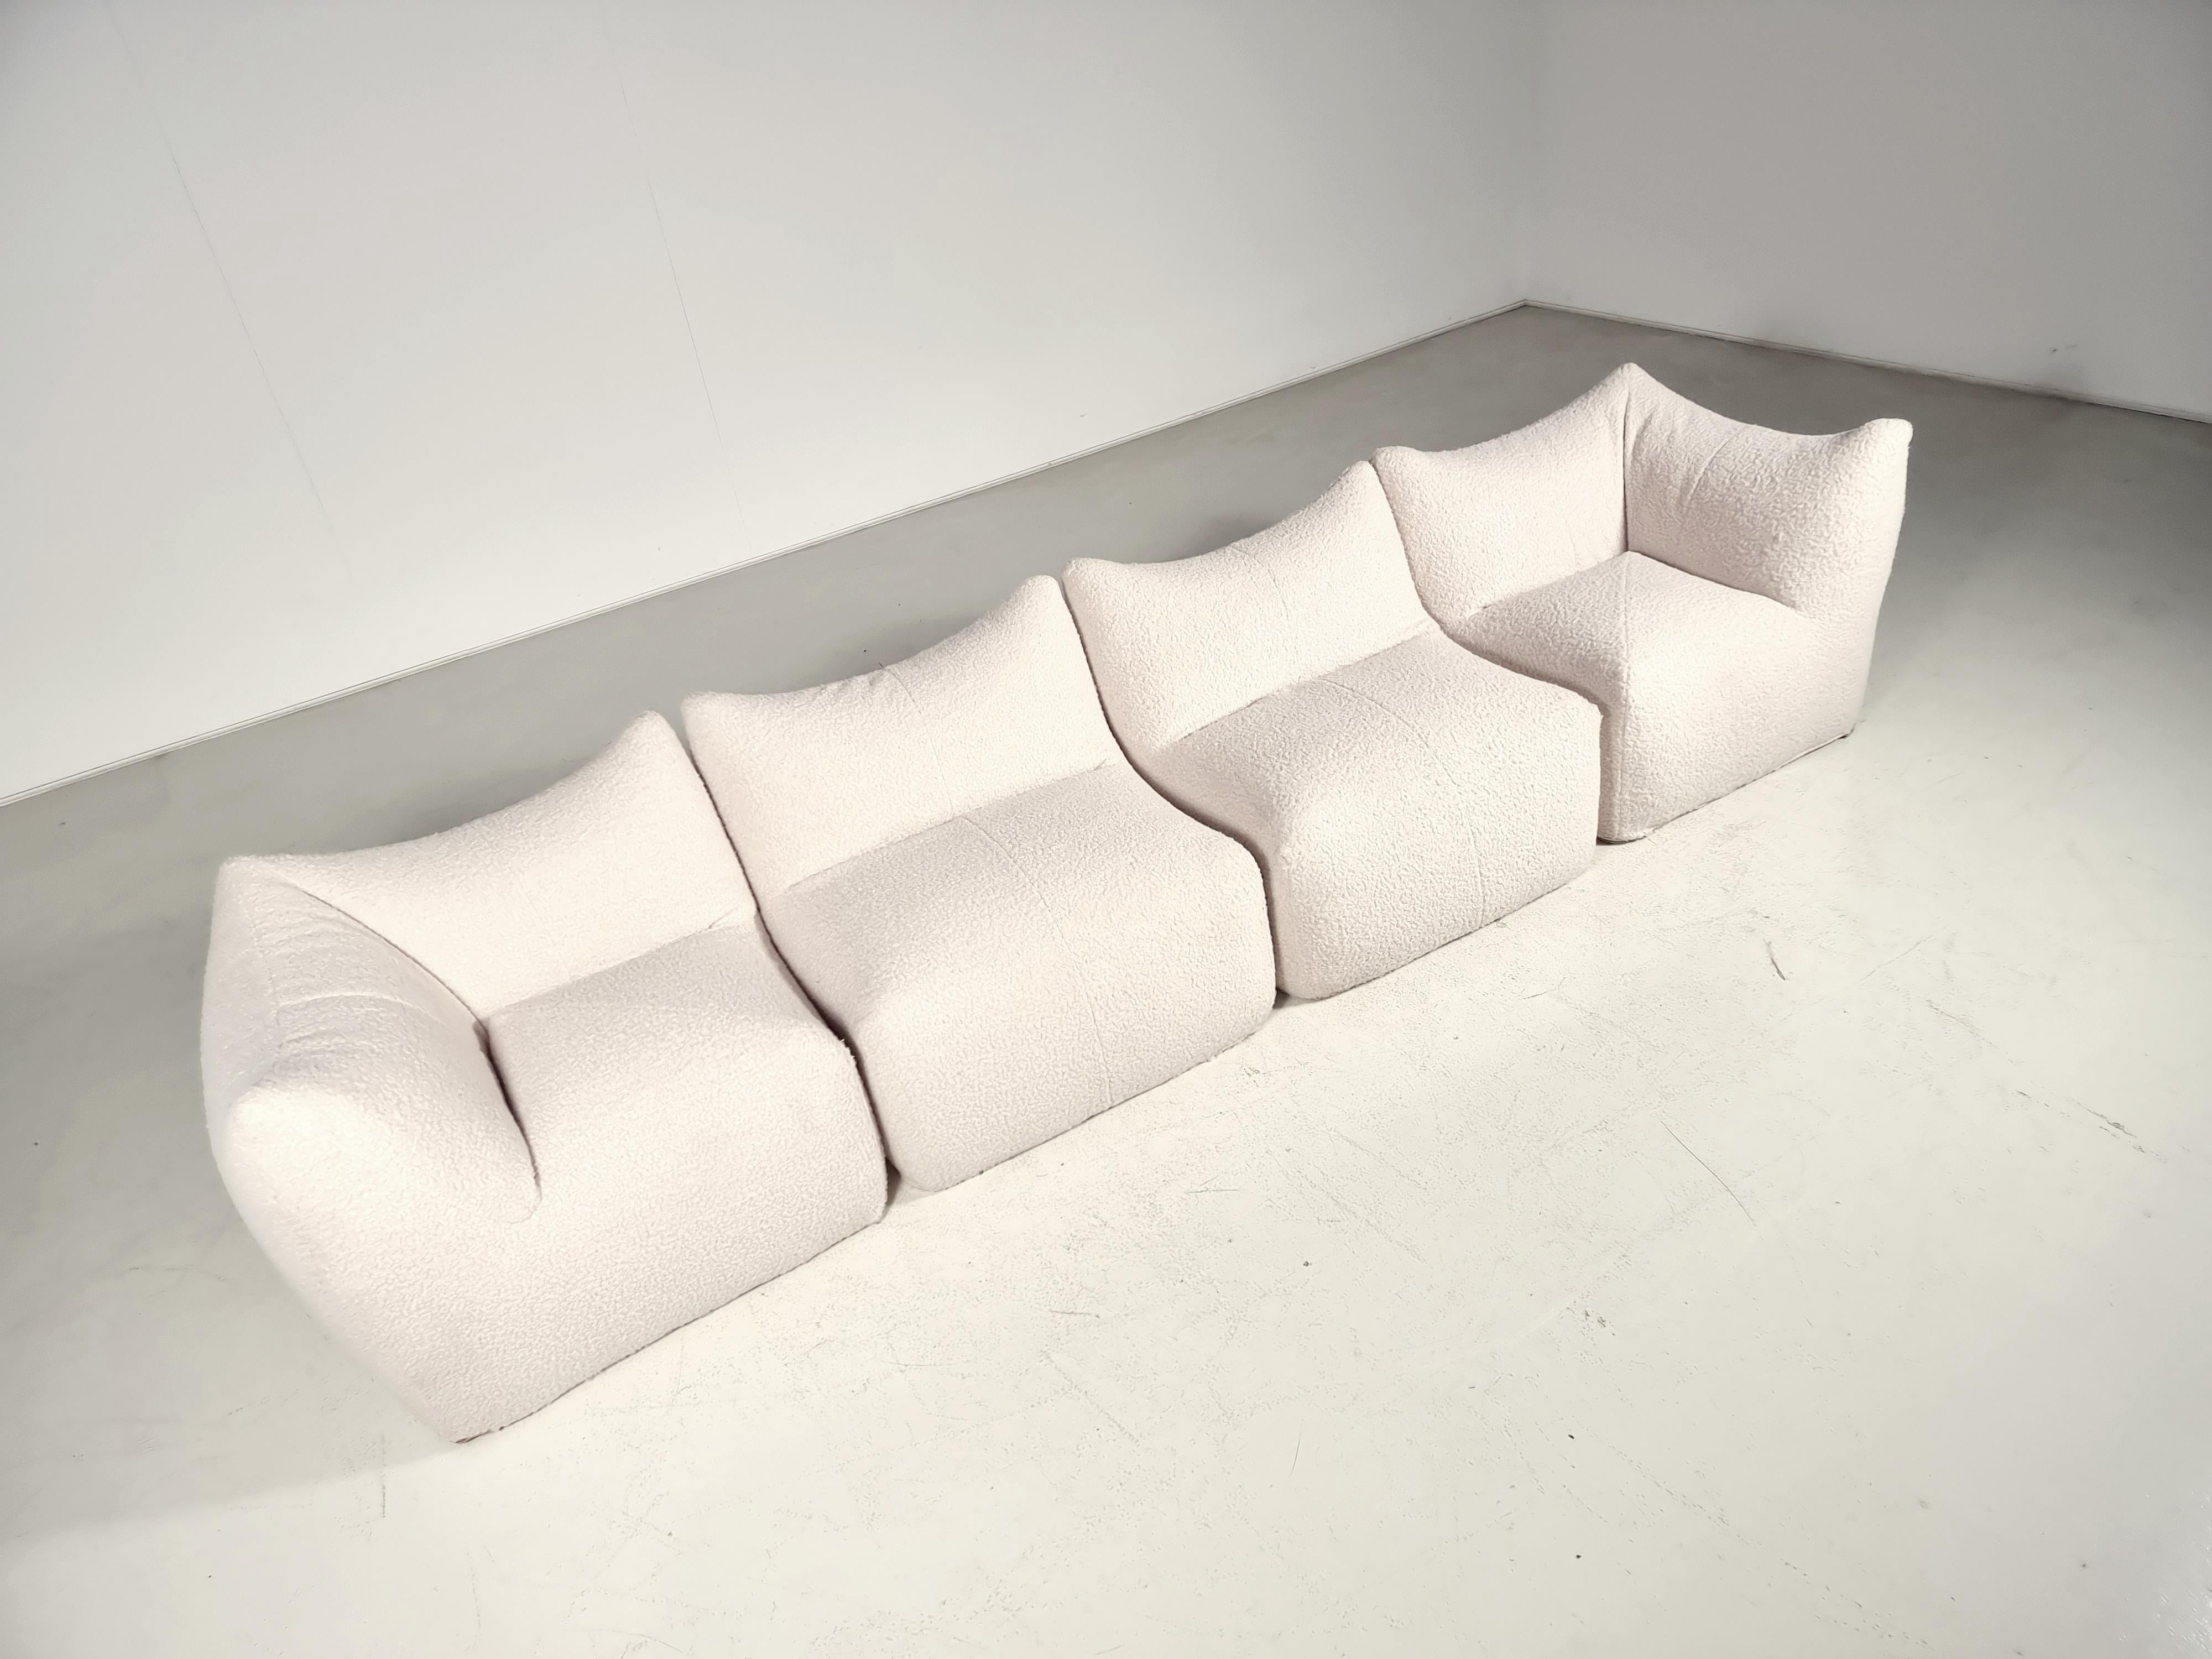 Le Bambole sectional sofa by Mario Bellini for B&B Italia, 1970s. The Bambole is an iconic piece of Italian design. It was awarded the 1979 'Compasso d'Oro' award. An example of Le Bambole is included in MoMA's permanent collection. It's well known